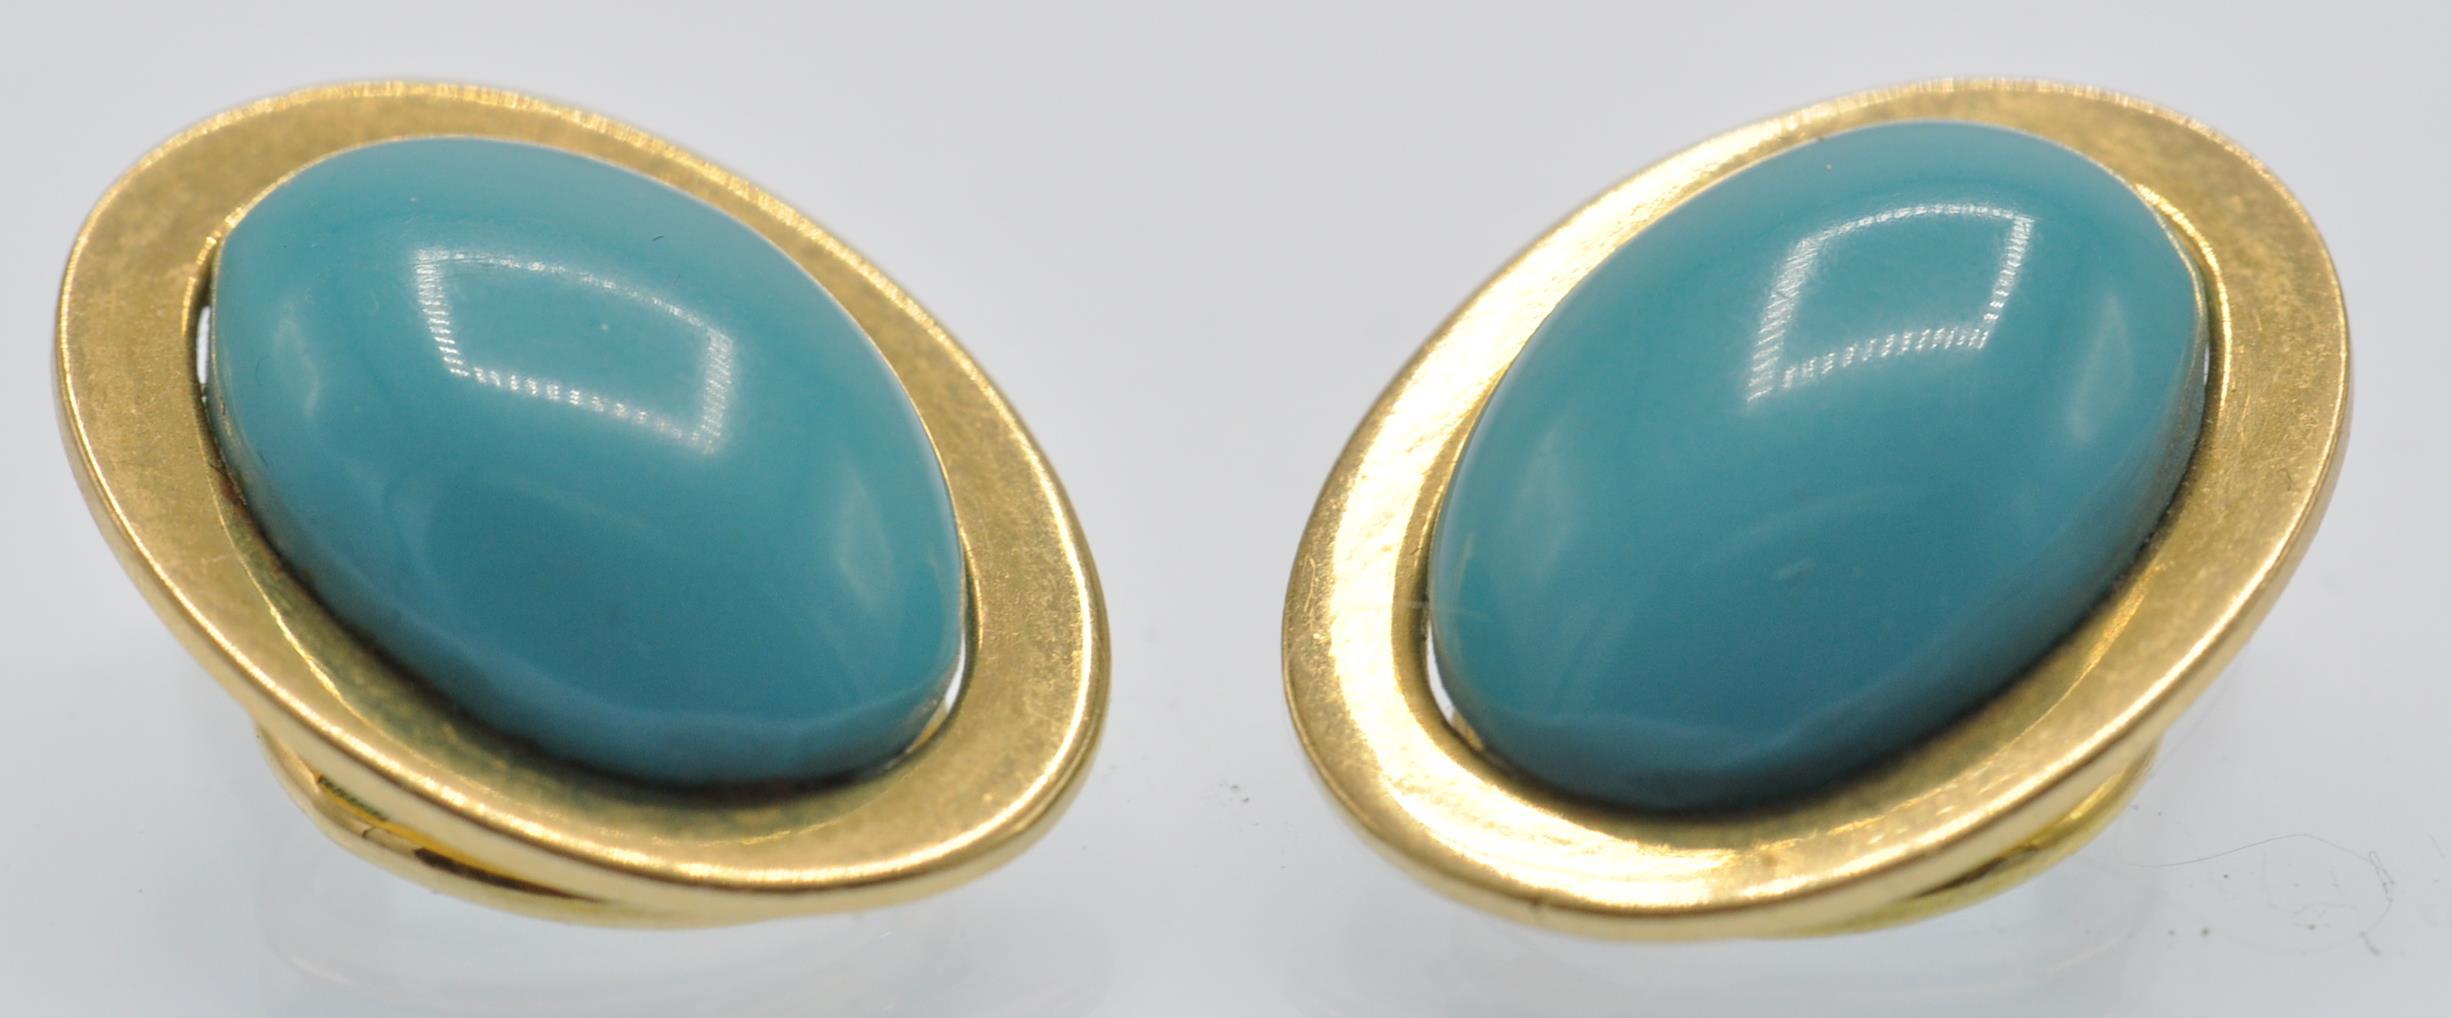 A Pair of 18ct Gold & Turquoise Earclips